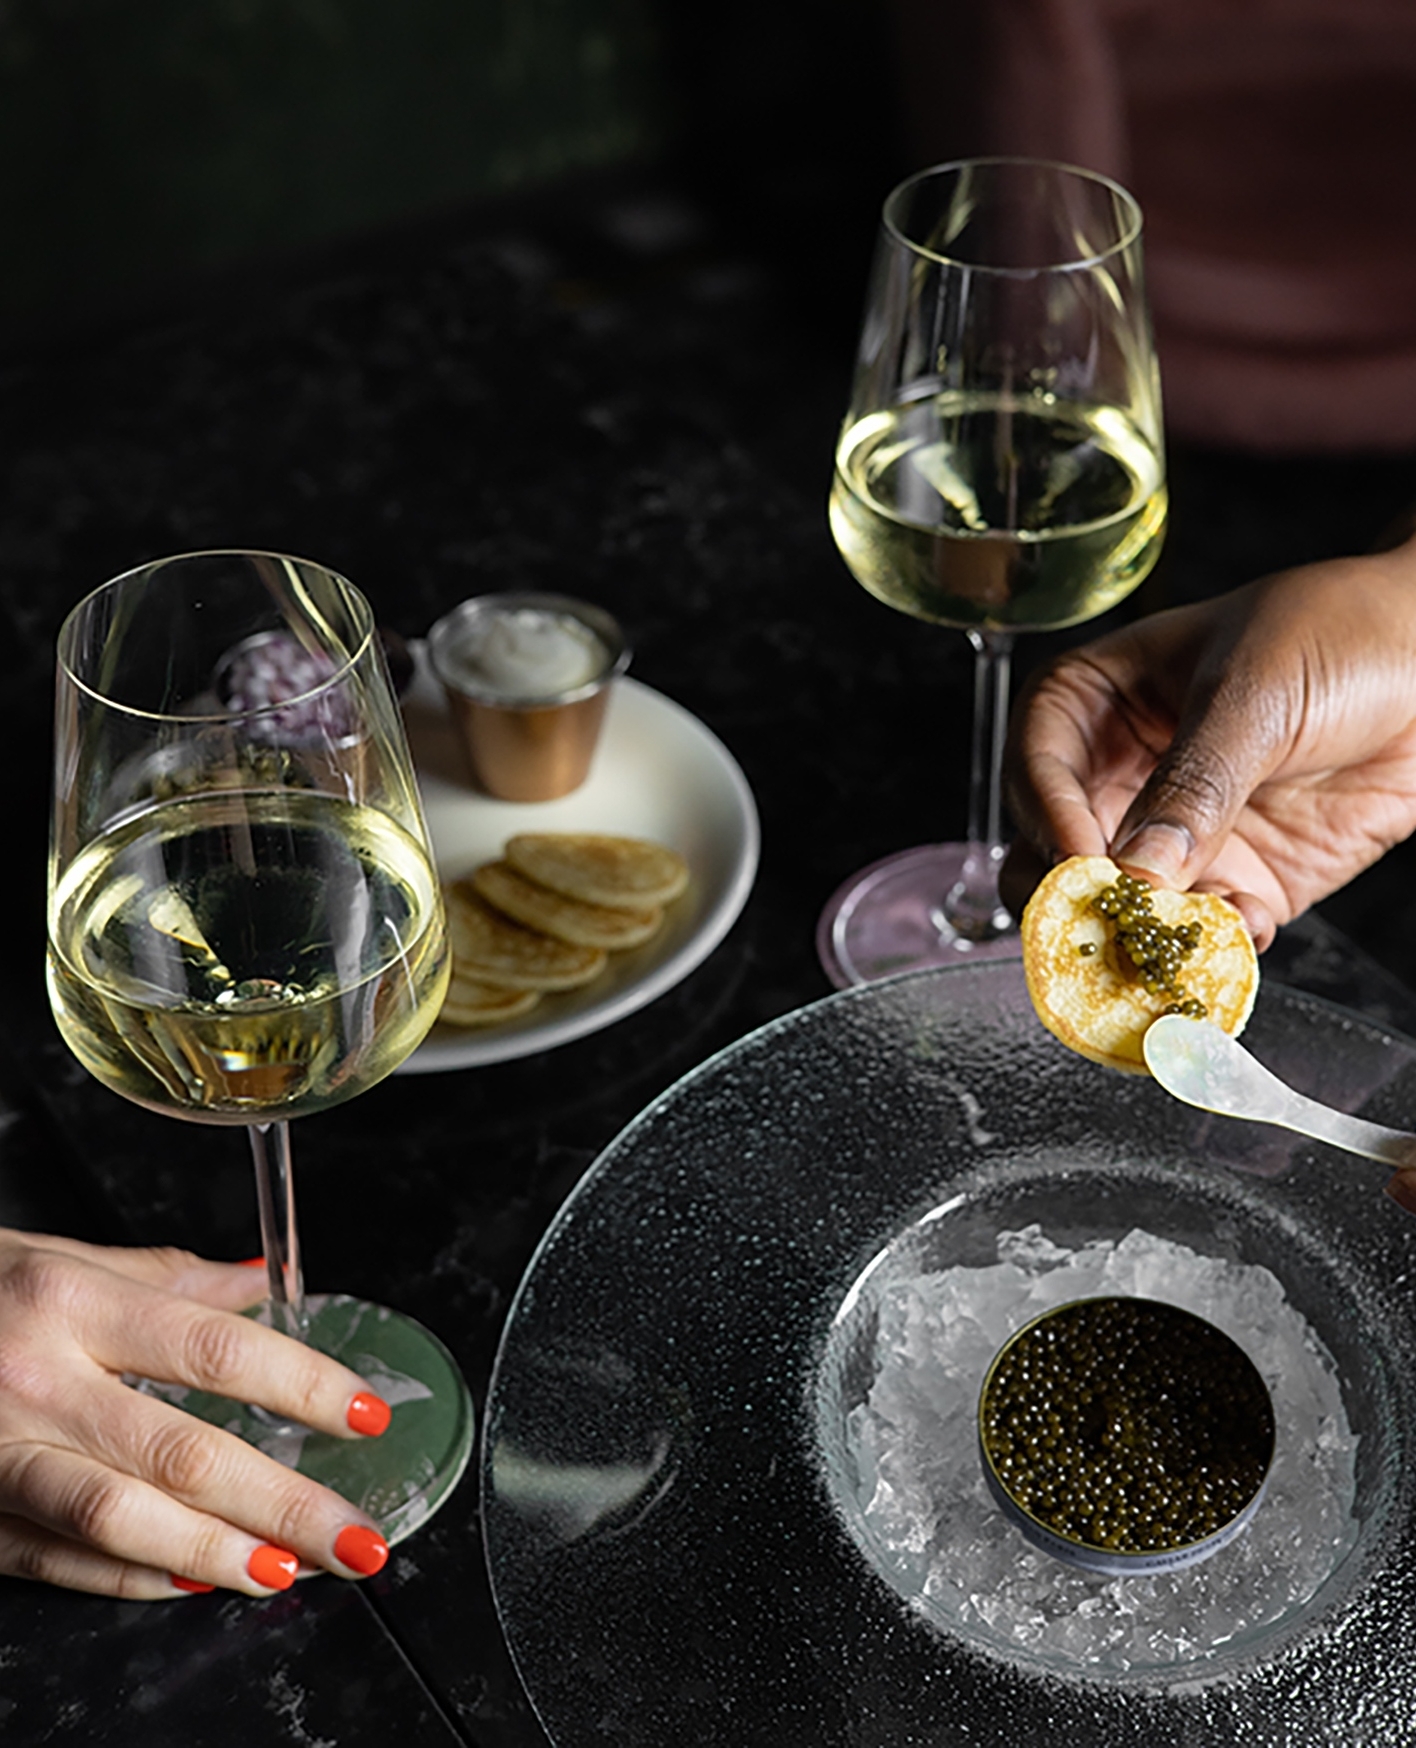 Champagne problems? Never heard of them. Especially when caviar's included.